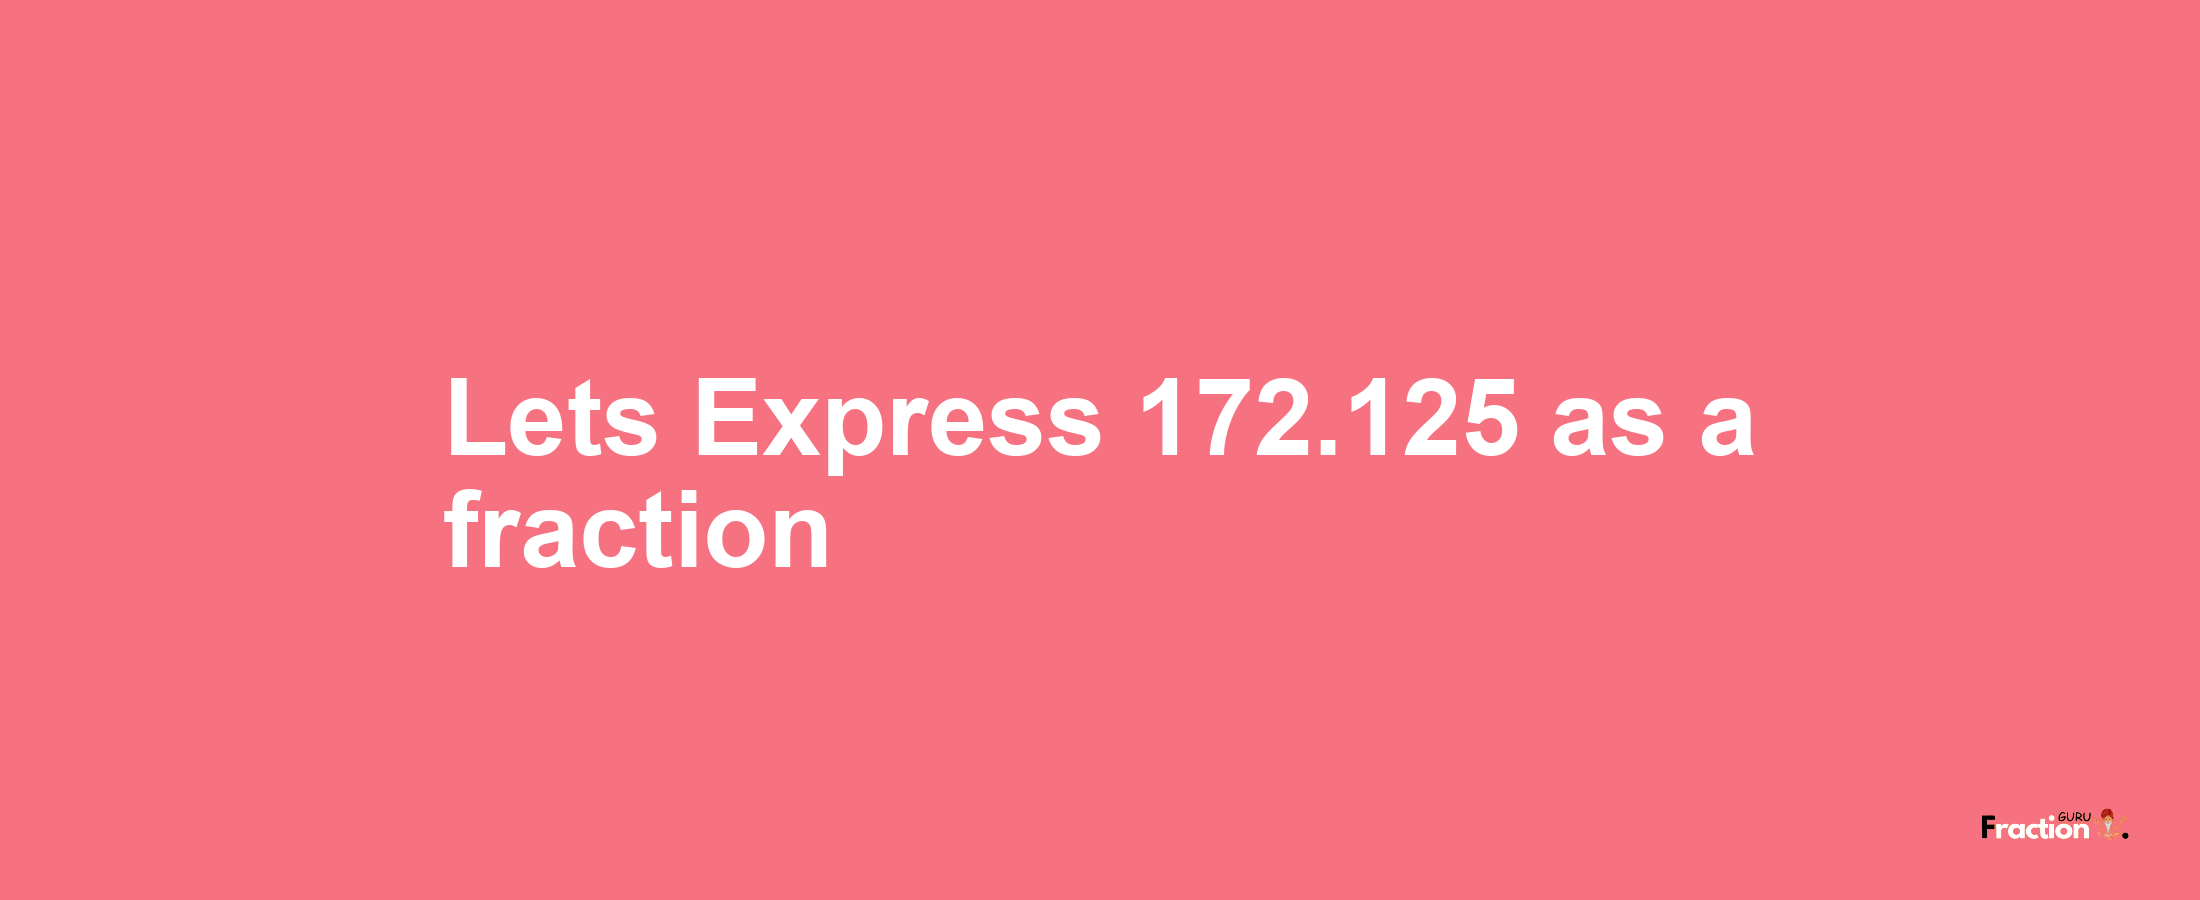 Lets Express 172.125 as afraction